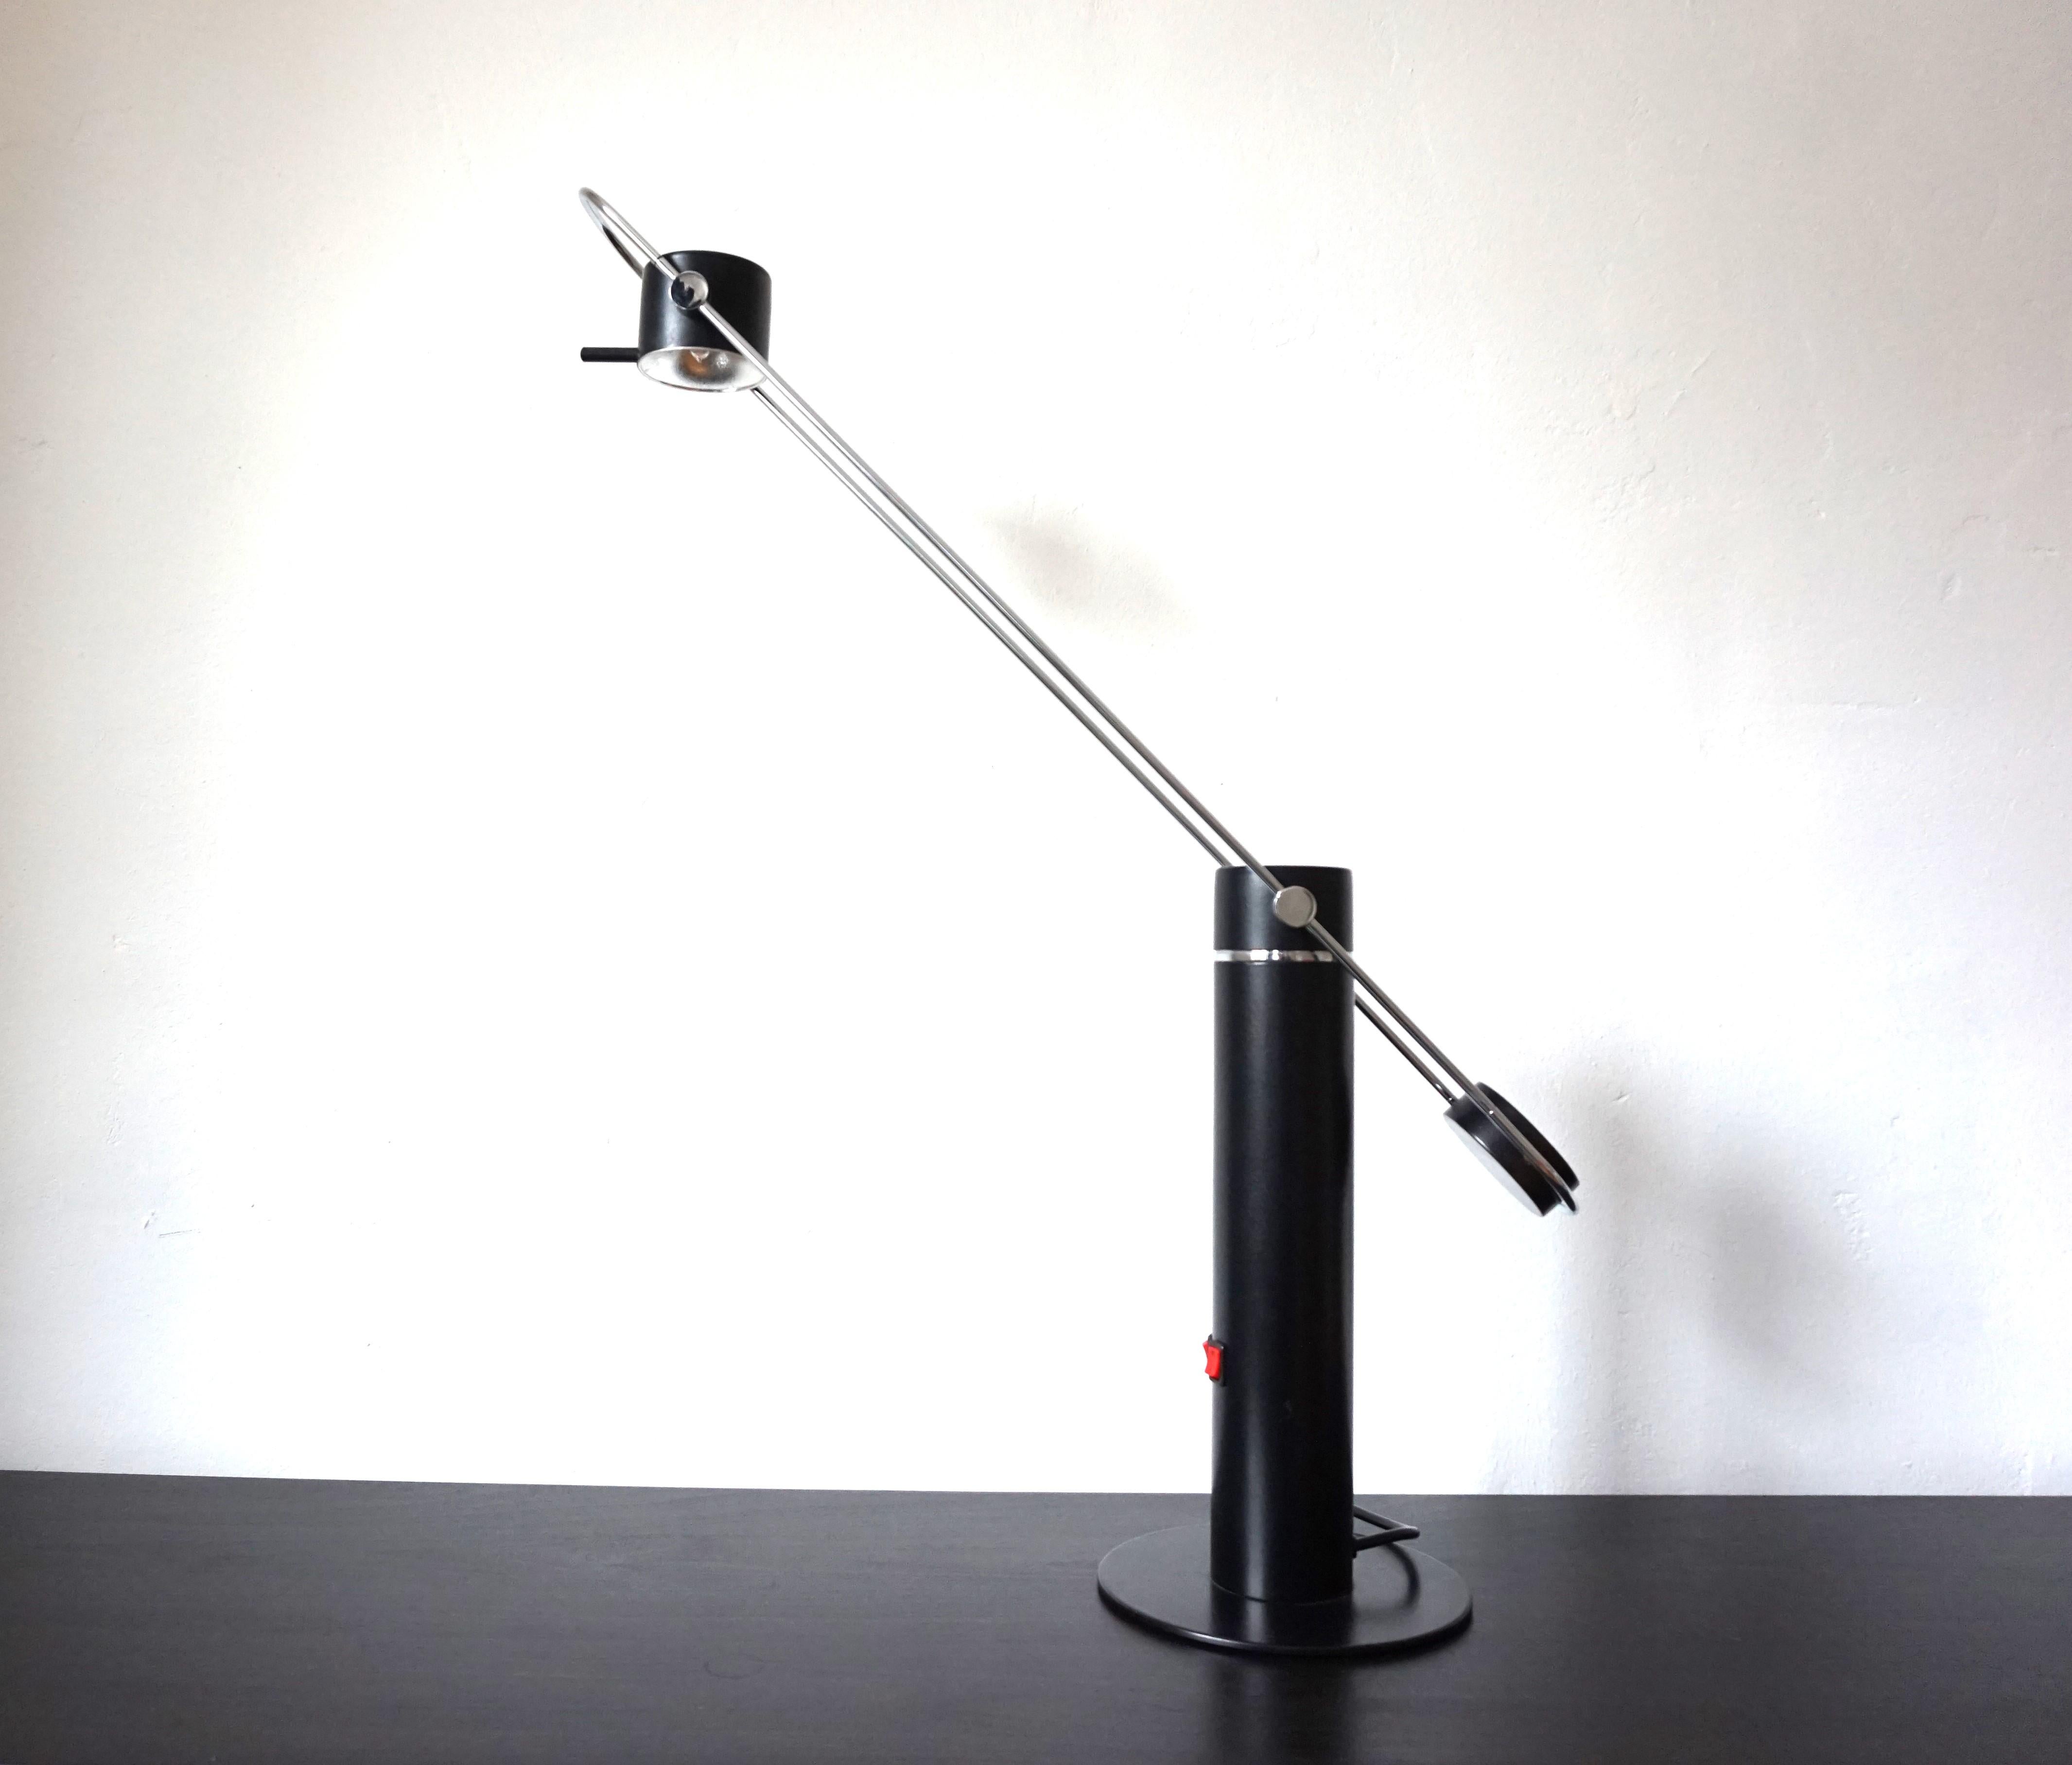 This delicately crafted table lamp with a swiveling arm is in excellent condition. The arm of the lamp made of stainless steel swivels as light as a feather and is also height-adjustable. The black round lamp head is infinitely adjustable and can be